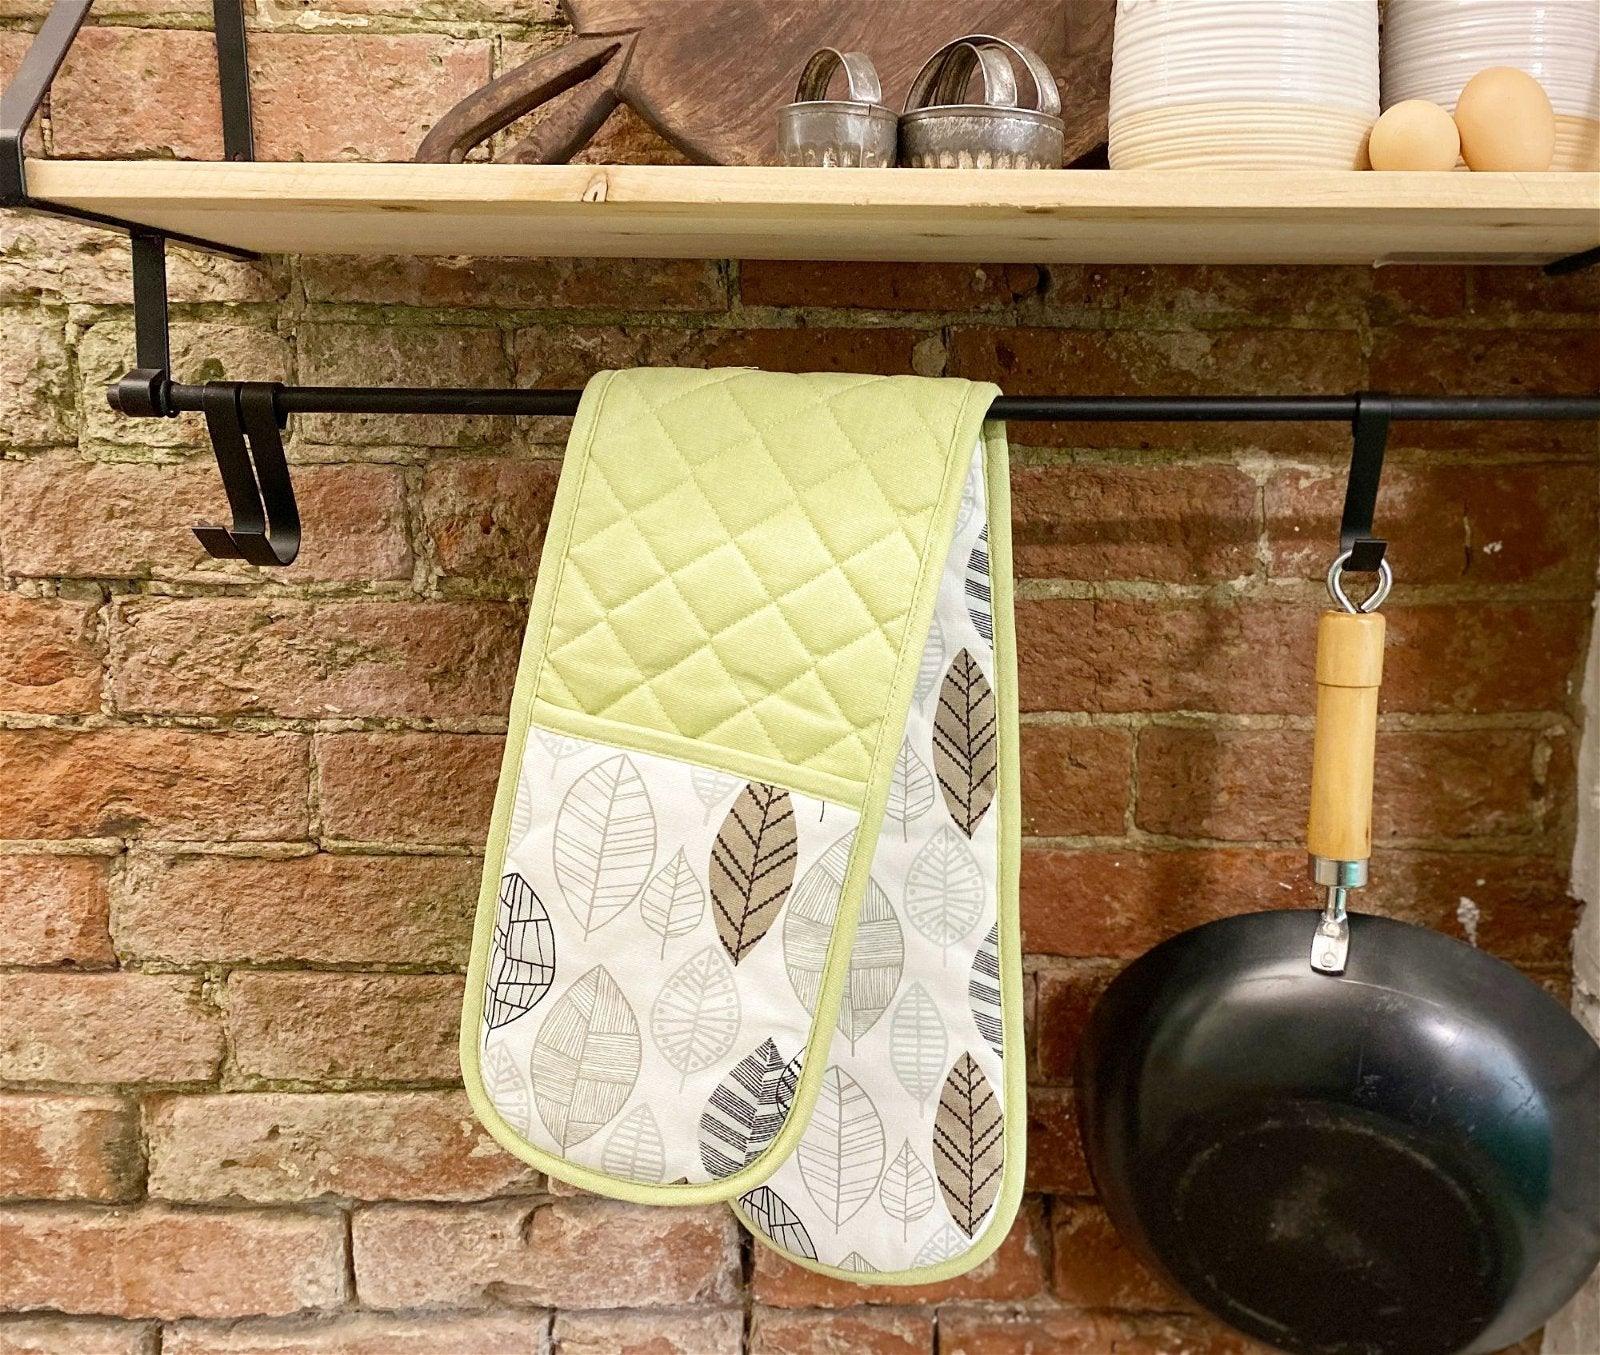 Kitchen Double Oven Glove With Contemporary Green Leaf Print Design - £20.99 - Decorative Kitchen Items 